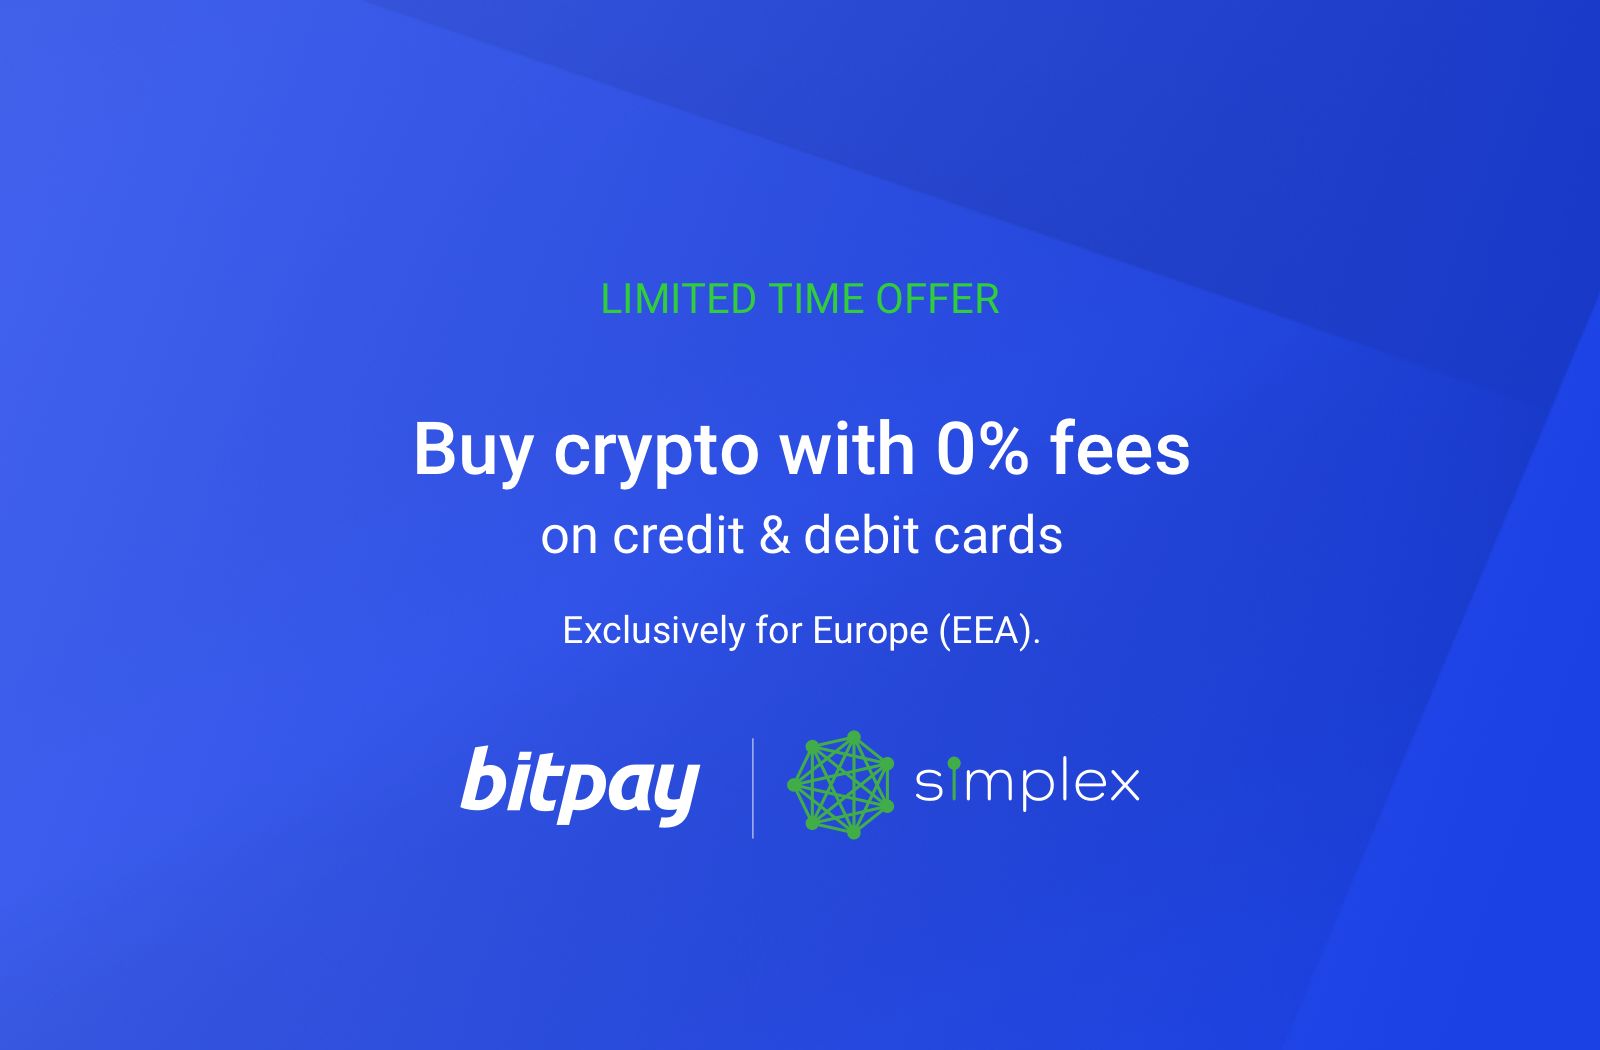 Attention Europe: Buy Crypto with No Credit Card Fees